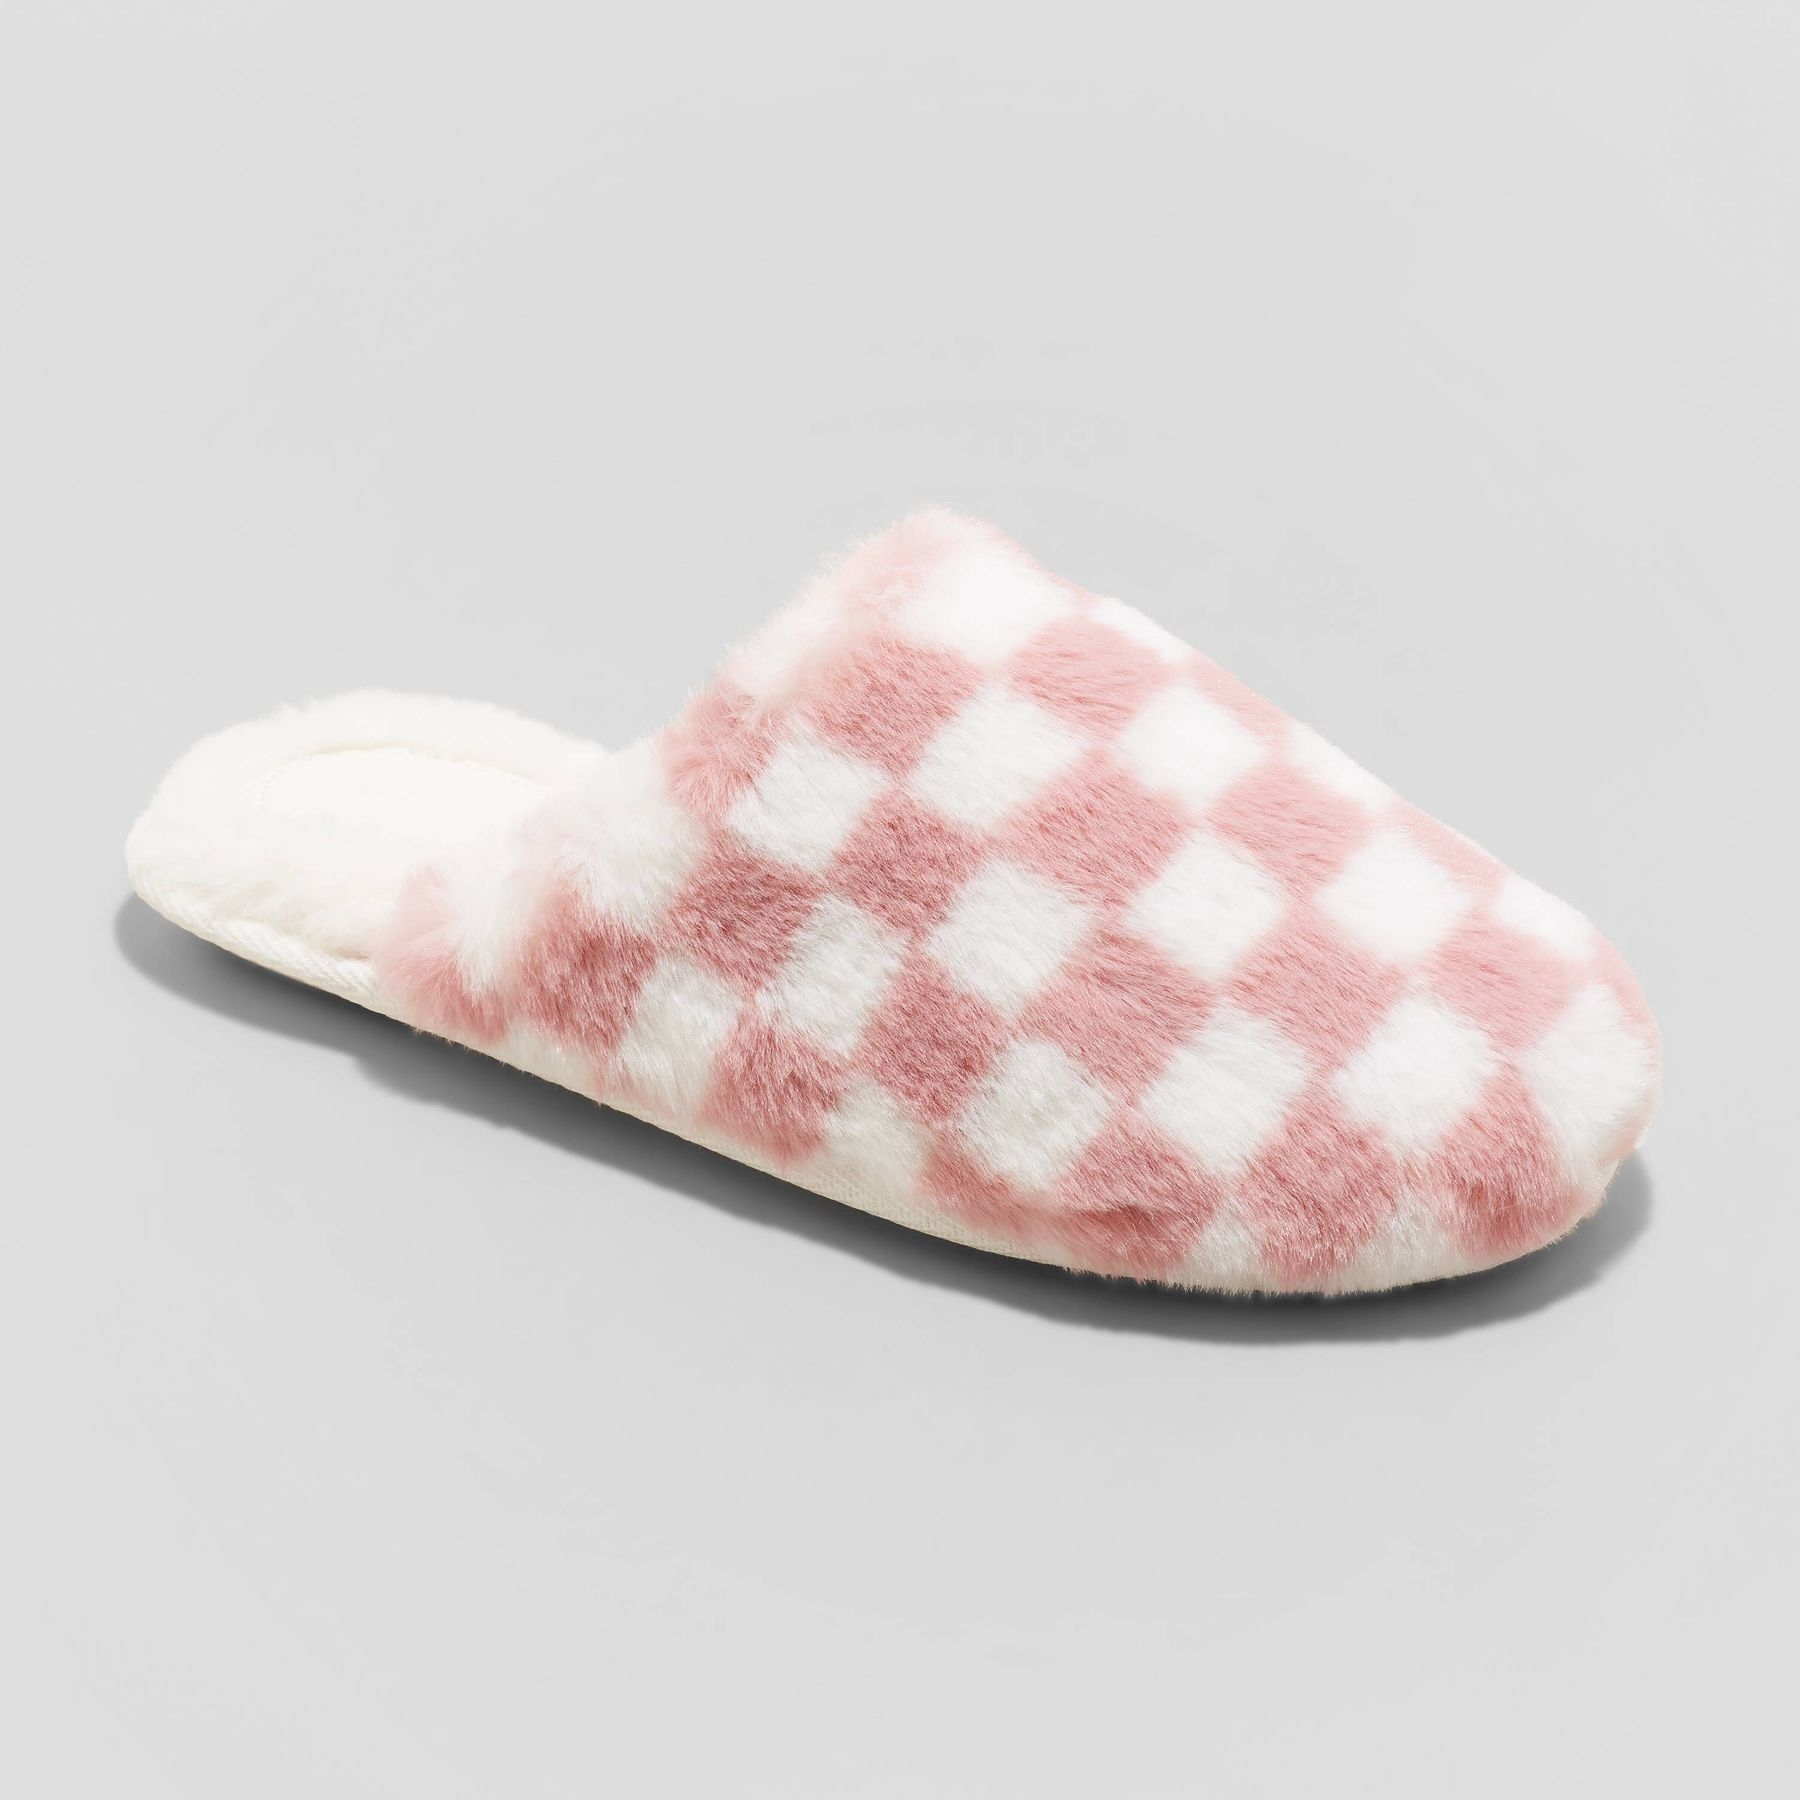 the slippers in a pink and white checker pattern